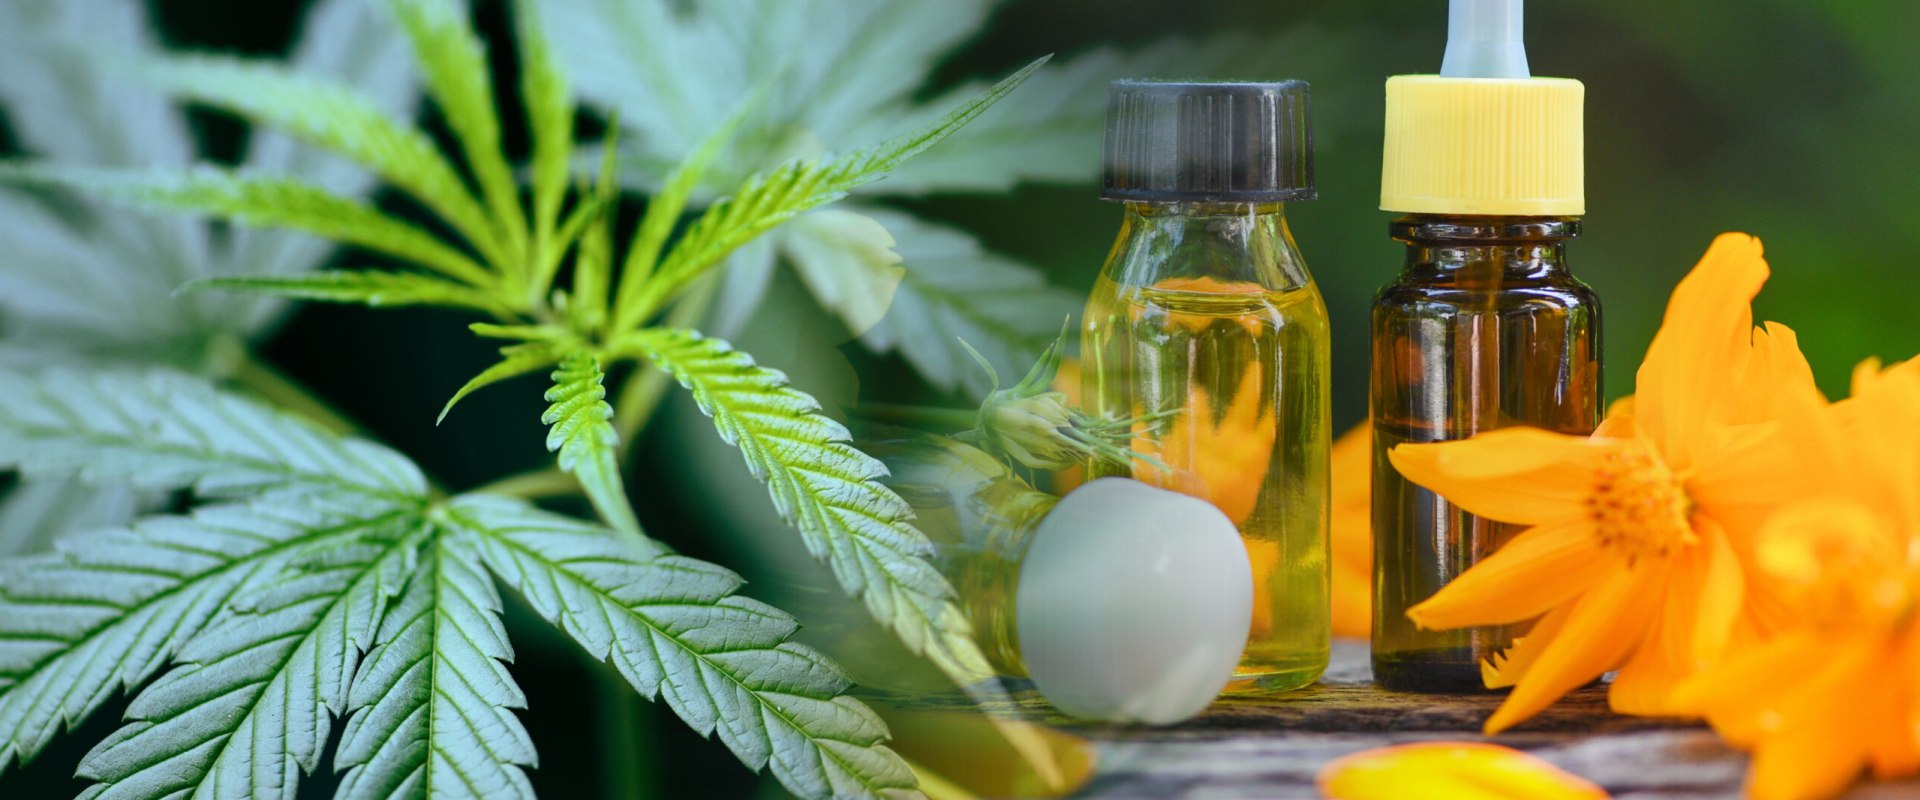 What CBD Products are FDA Approved?